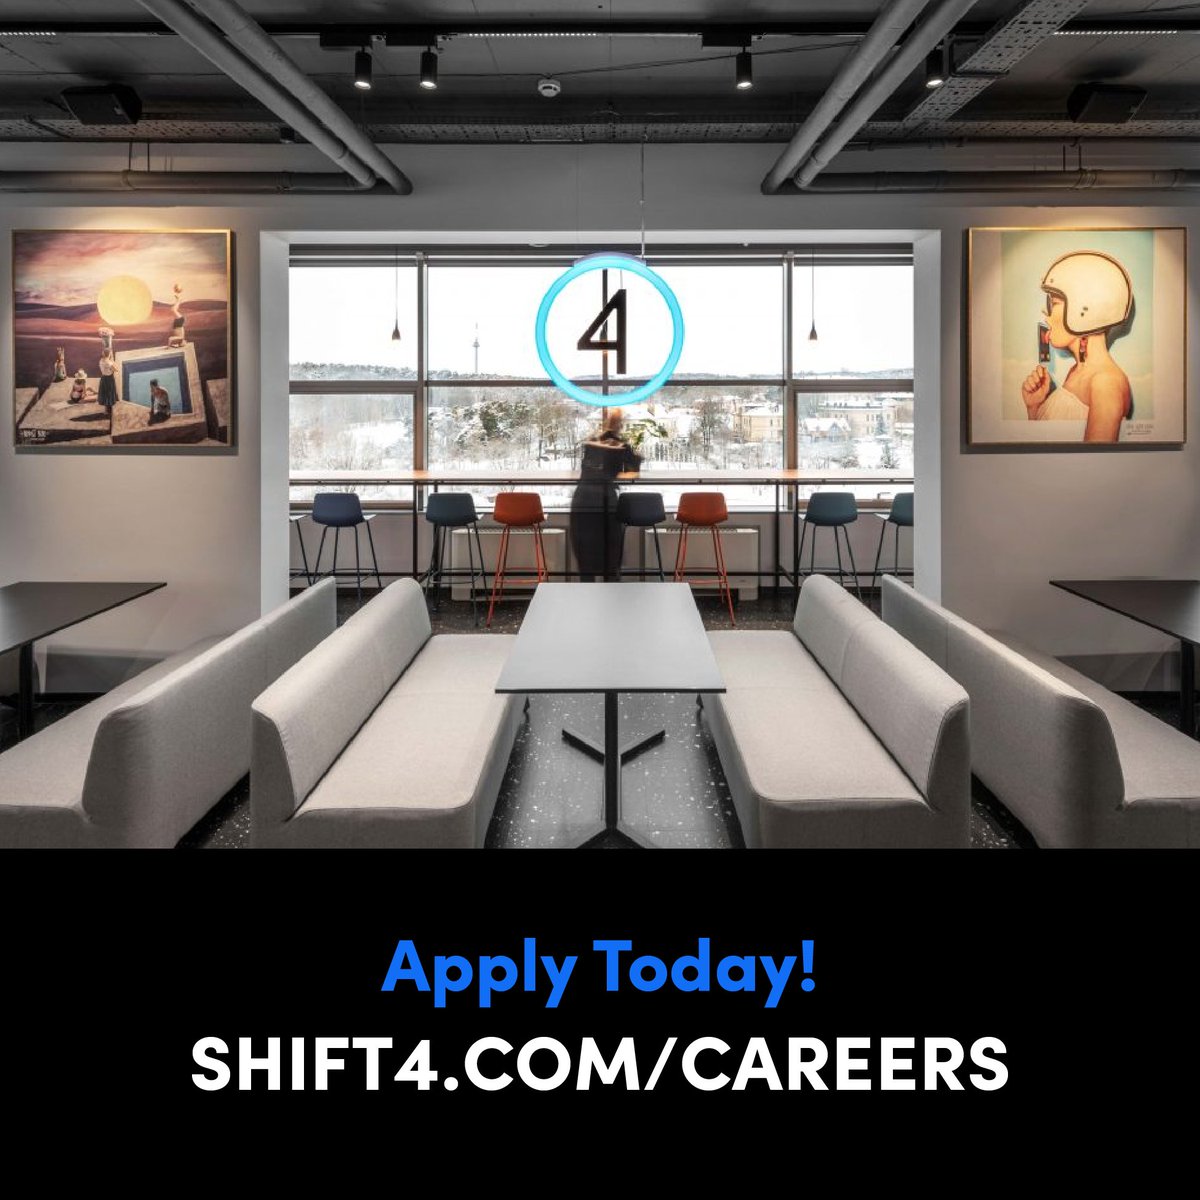 At Shift4, we’re doing big things – and we want you to be a big part of it. Join #TeamFOUR today: shift4.com/careers